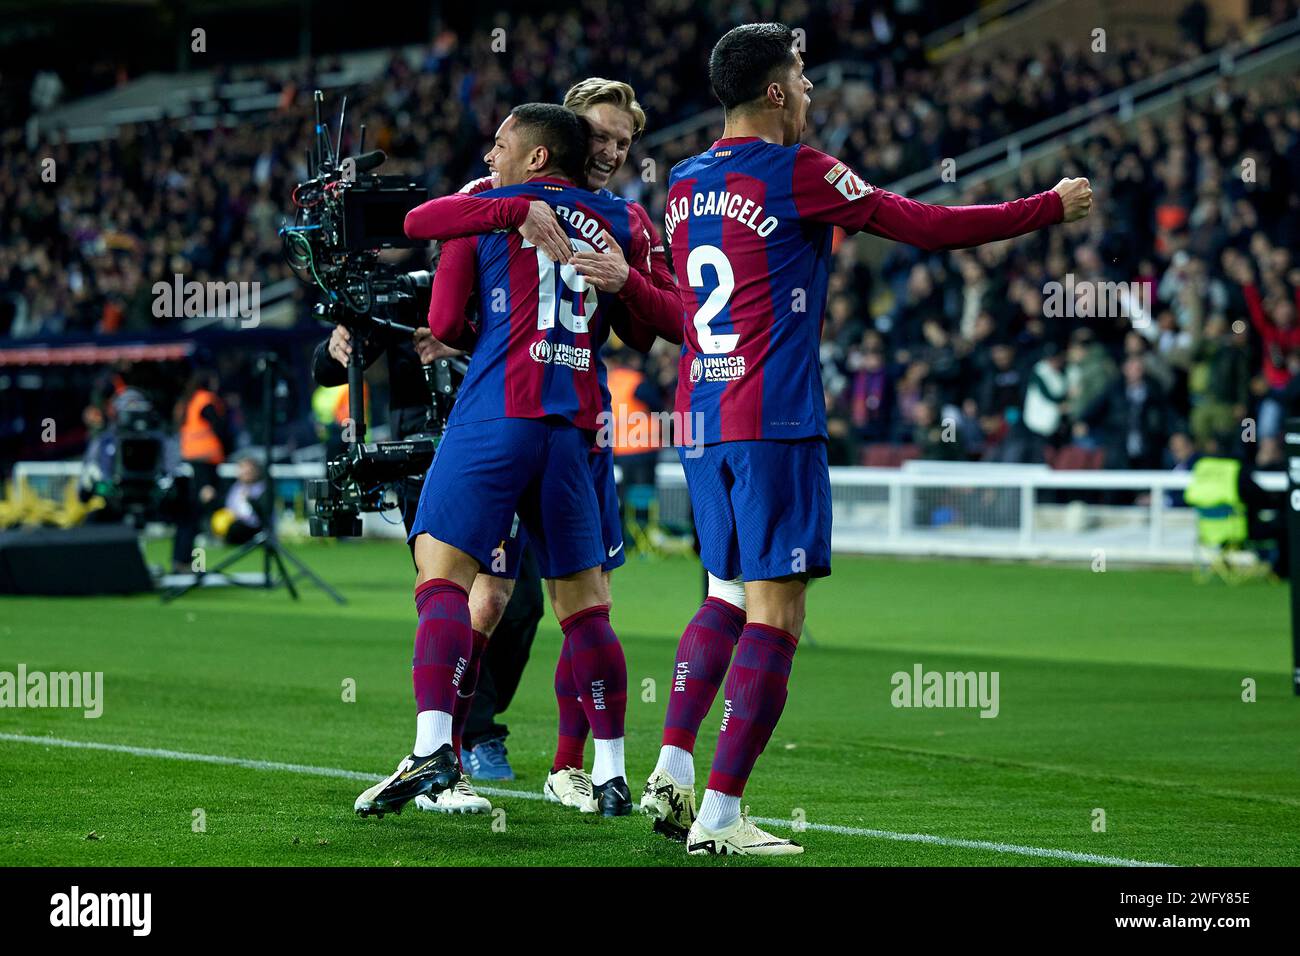 Barcelona, Spain. 31st Jan, 2024. BARCELONA, SPAIN - JANUARY 31: Vitor Roque of FC Barcelona celebrates his first ever goal as FC Barcelona player during the La Liga EA Sports match between FC Barcelona and CA Osasuna at the Estadi Olimpic Lluis Companys on January 31, 2024 in Barcelona, Spain. Credit: DAX Images/Alamy Live News Stock Photo